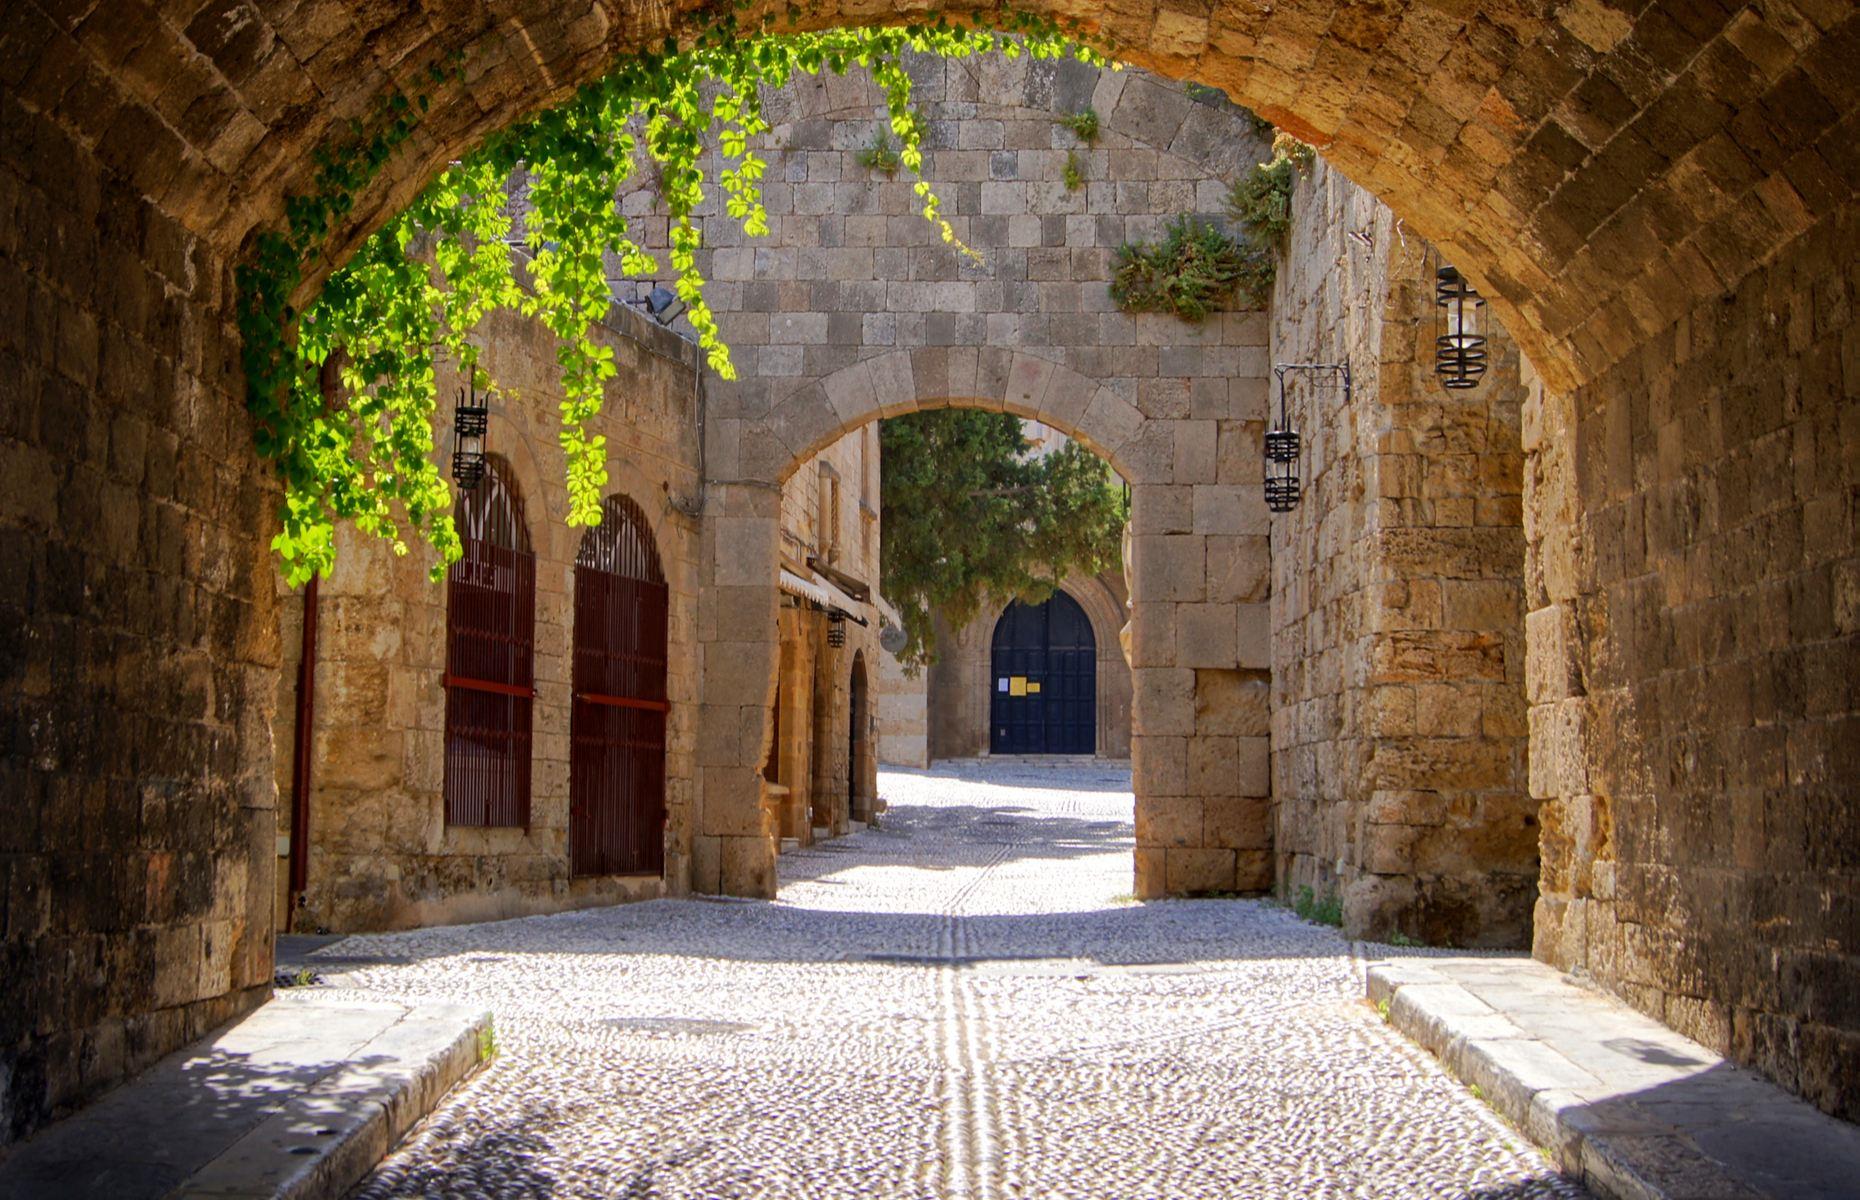 The island of Rhodes, off the east coast of Greece, has a wealth of ancient structures – but its perfectly preserved medieval city is a wonder to behold. In 1309, the military Order of the Knights of Saint John of Jerusalem made their headquarters on the island and set about transforming it into a stronghold. It later came under Italian and then Turkish rule. The beauty of the Gothic architecture, constructed in white stone, makes the city shine like a jewel.